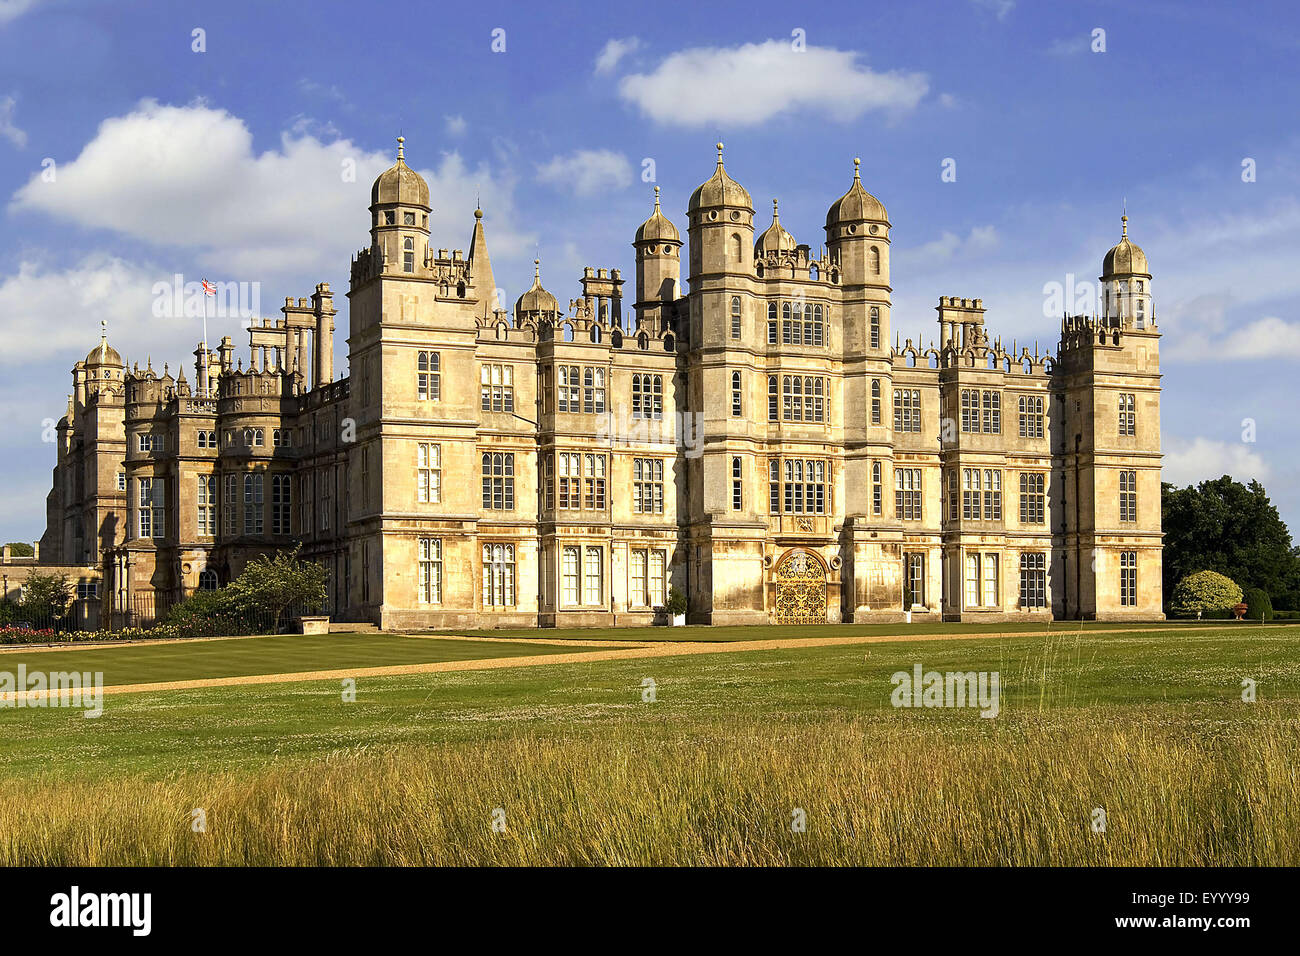 Burghley House, an english county house near Stamford , United Kingdom, England, Lincolnshire Stock Photo